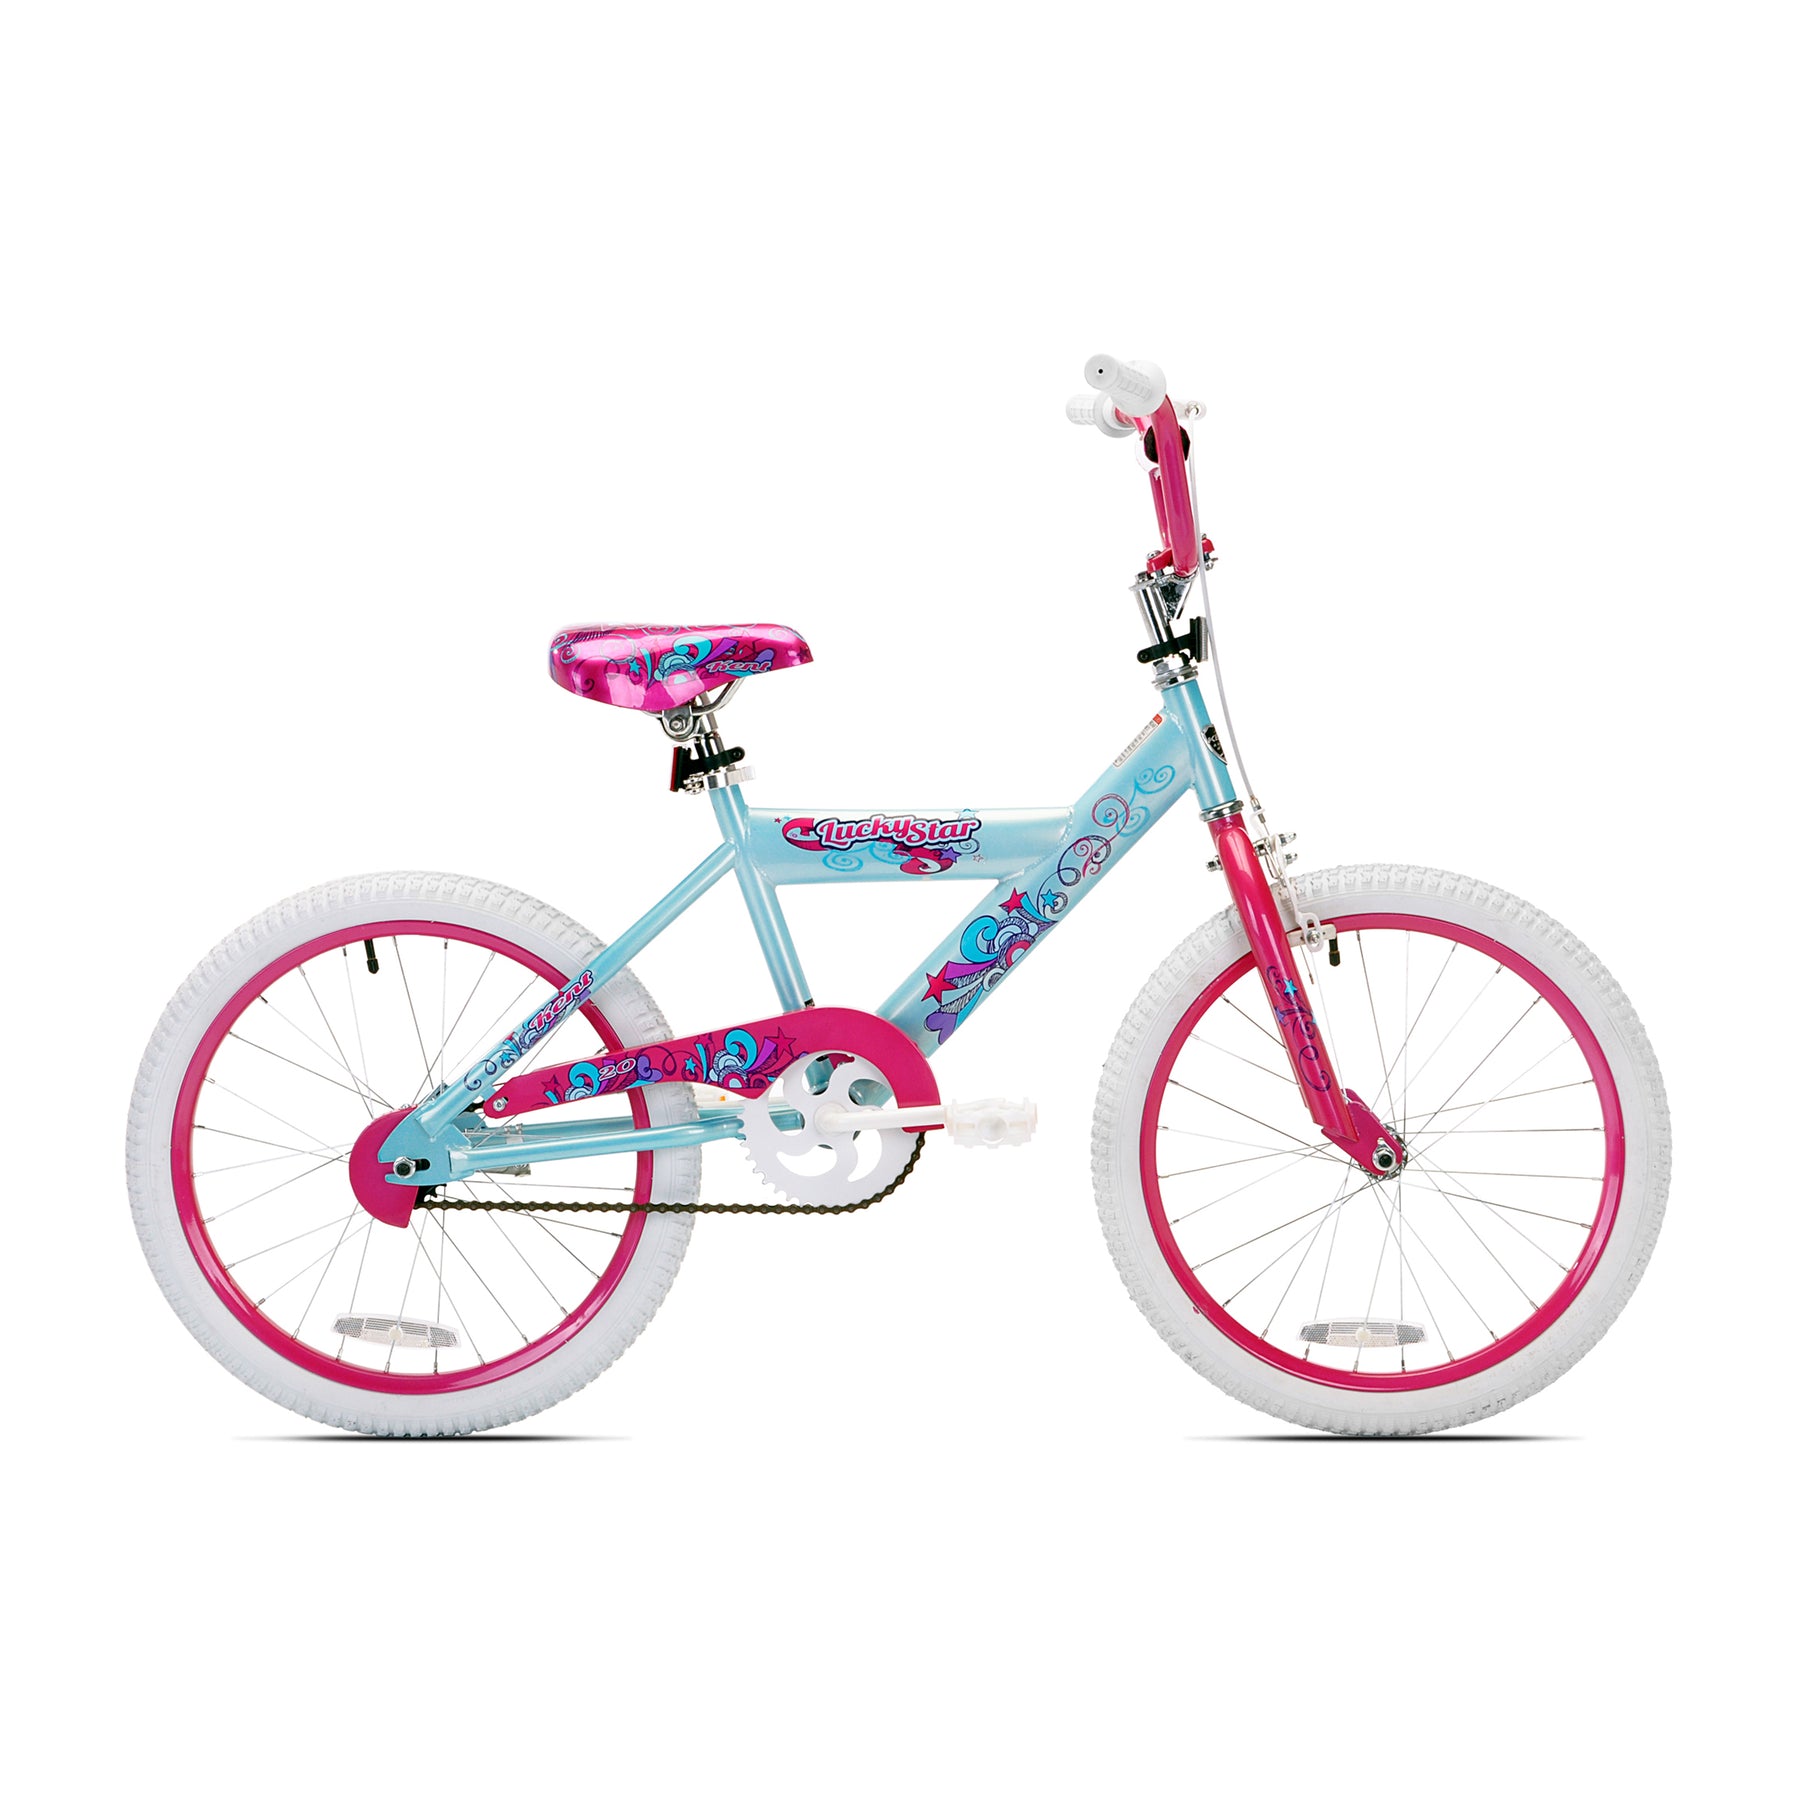 20" Kent Lucky Star | Bike for Kids Ages 7-13